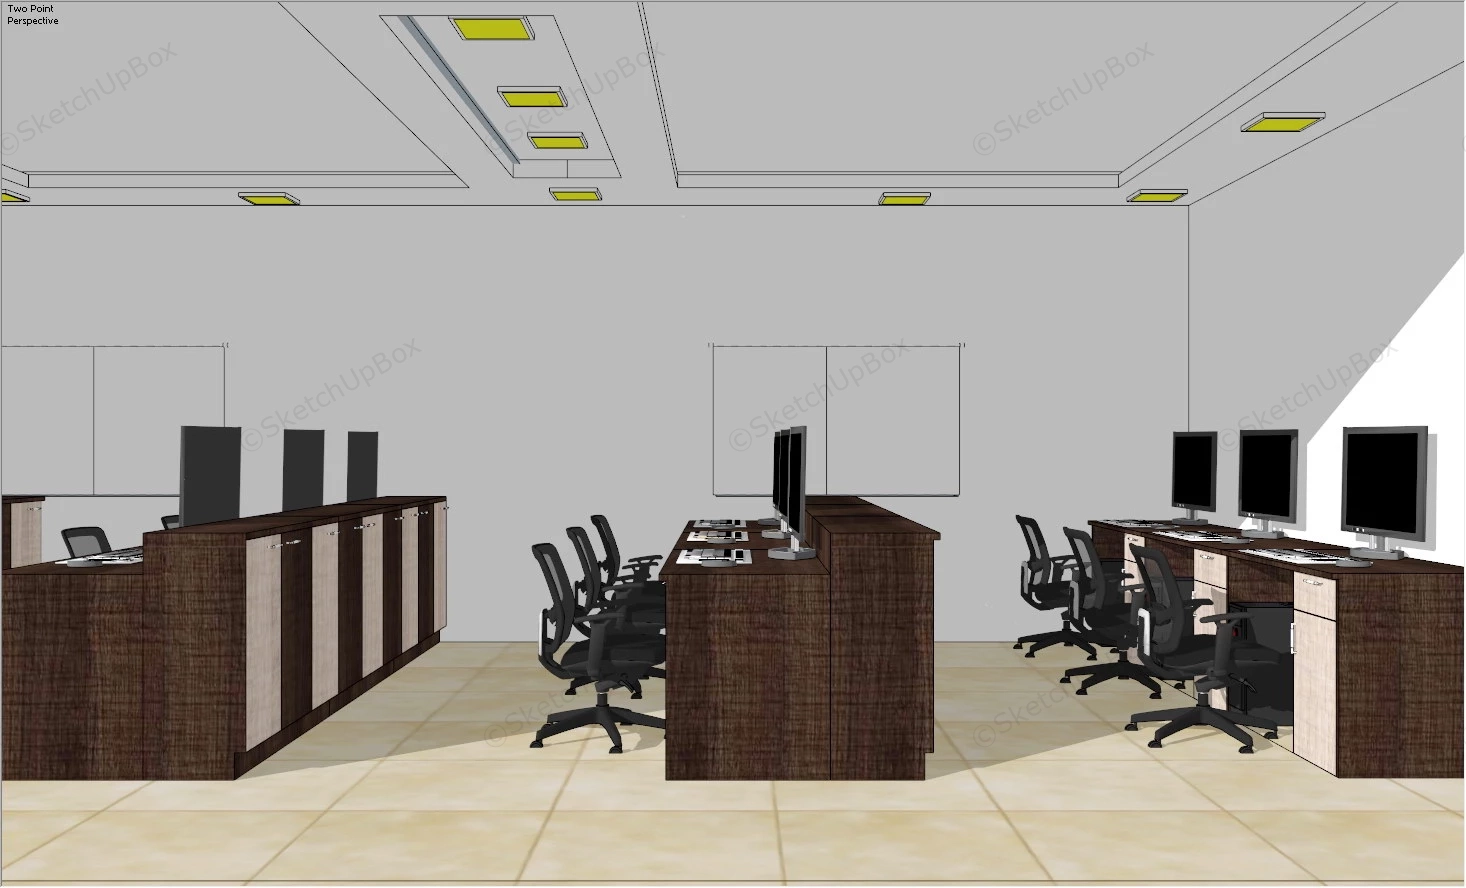 Traditional Office Space Design Idea sketchup model preview - SketchupBox